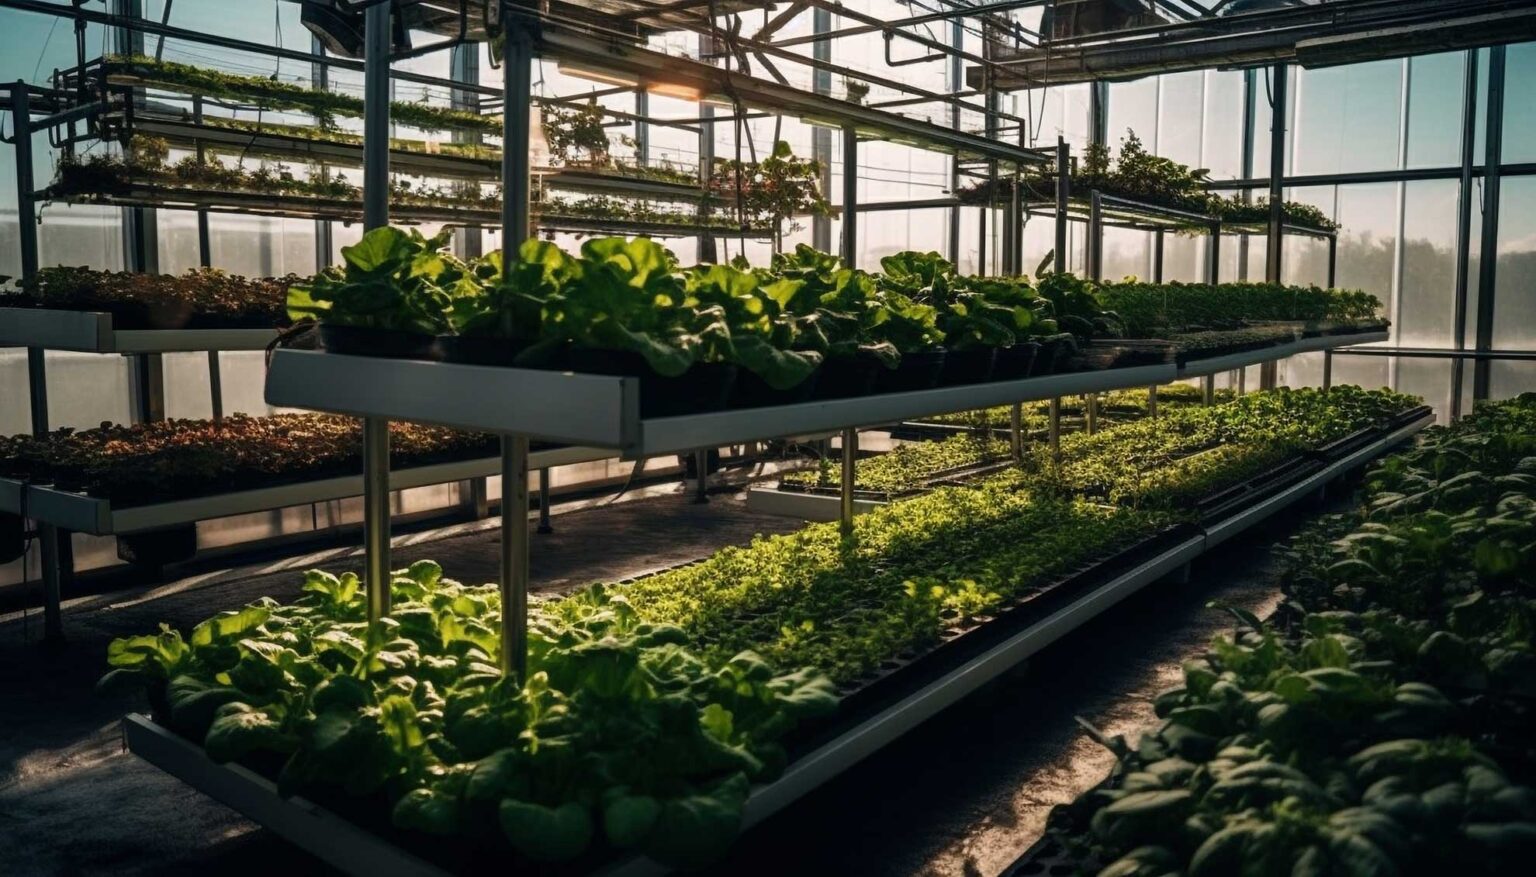 Greenlight Analytical - Vertical Farming is The Future